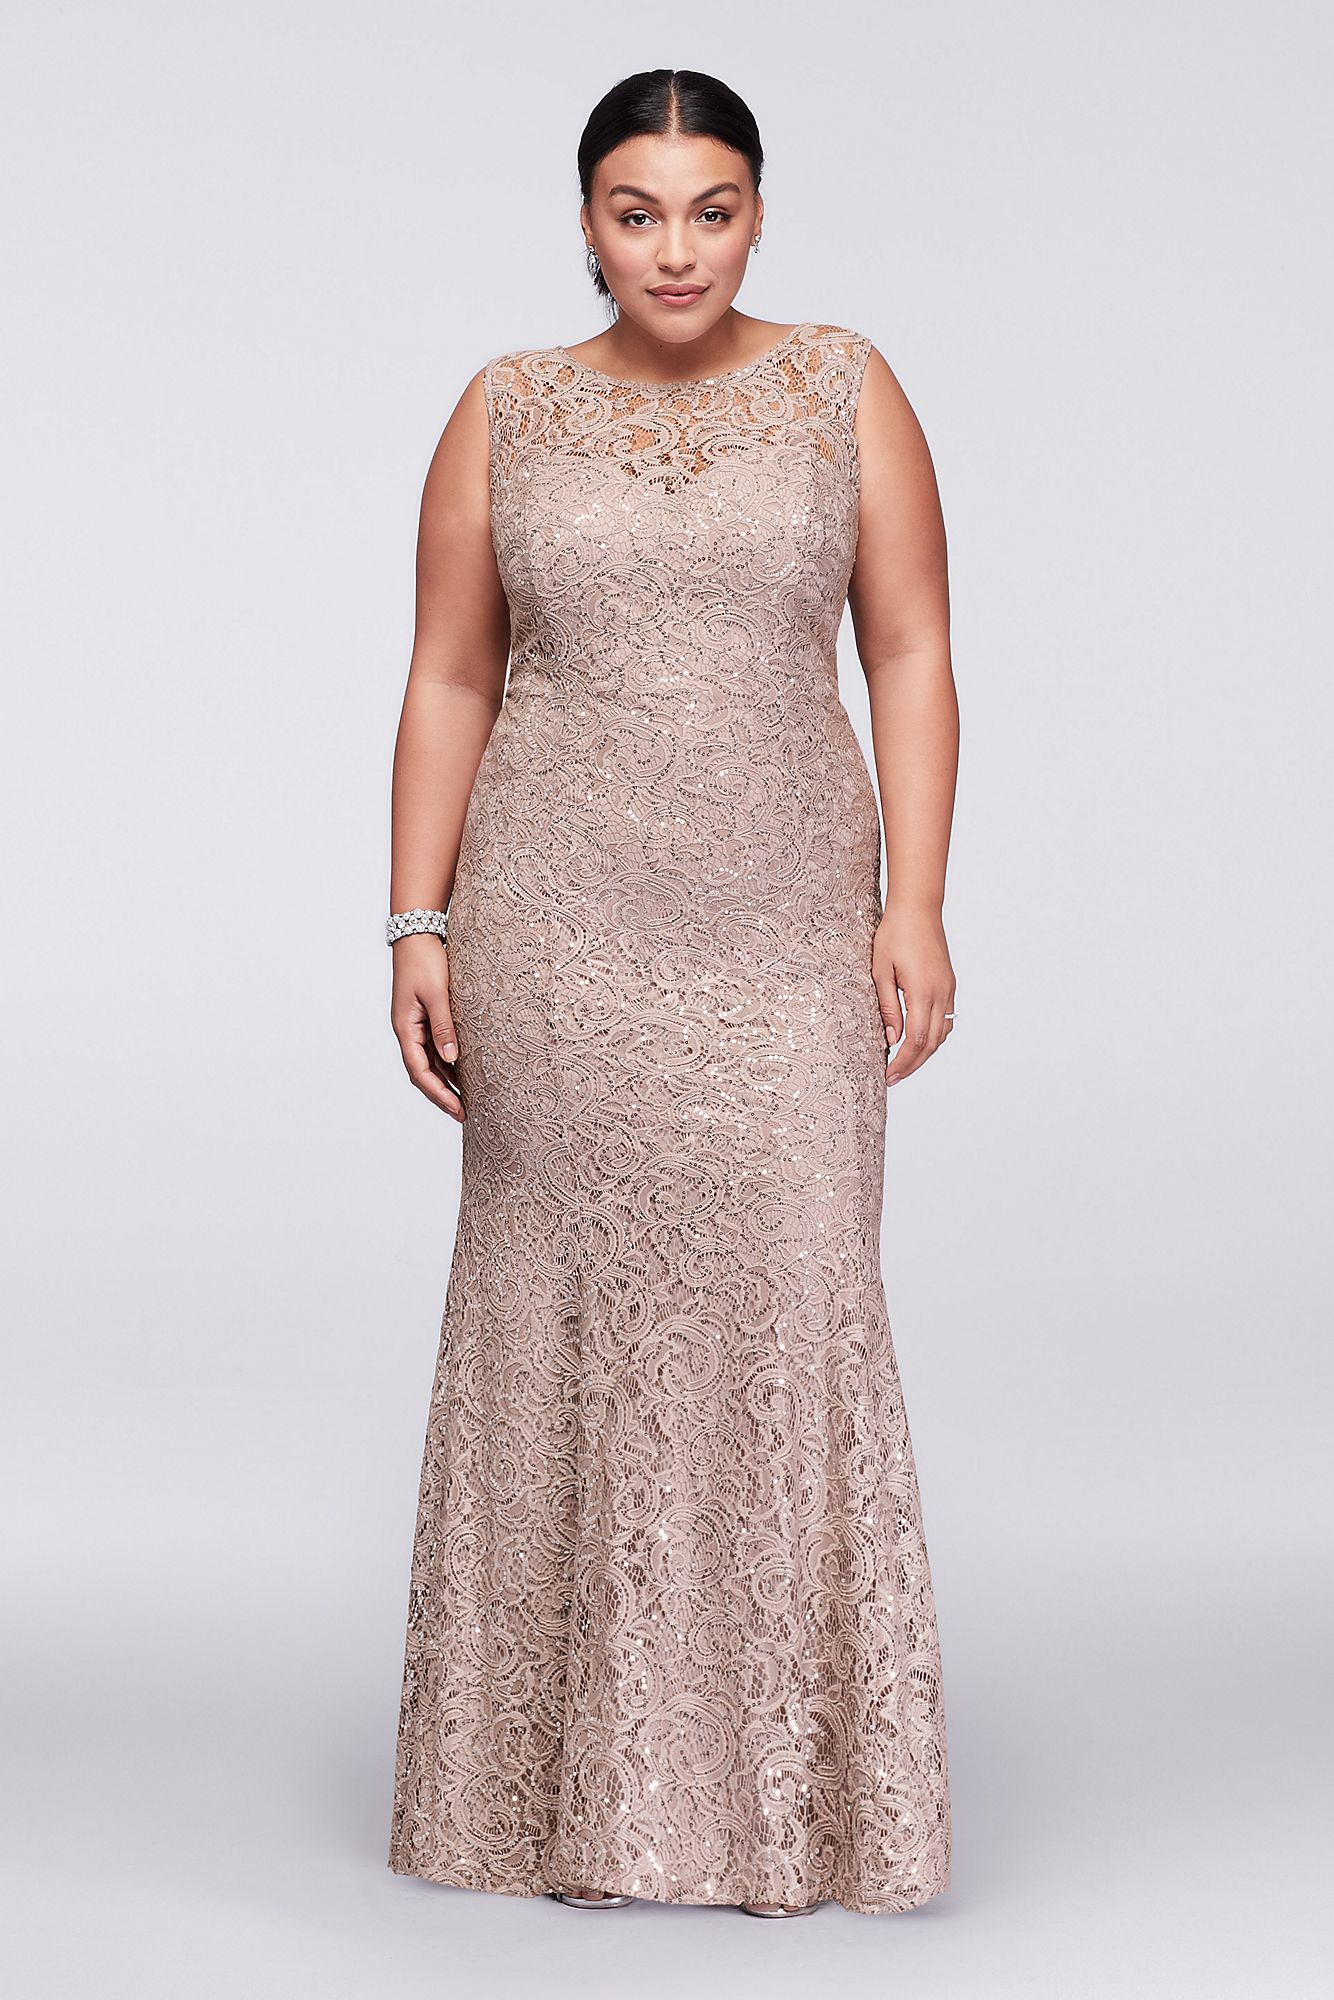 Long Lace Plus Size Dress with Beaded Capelet 3523DW